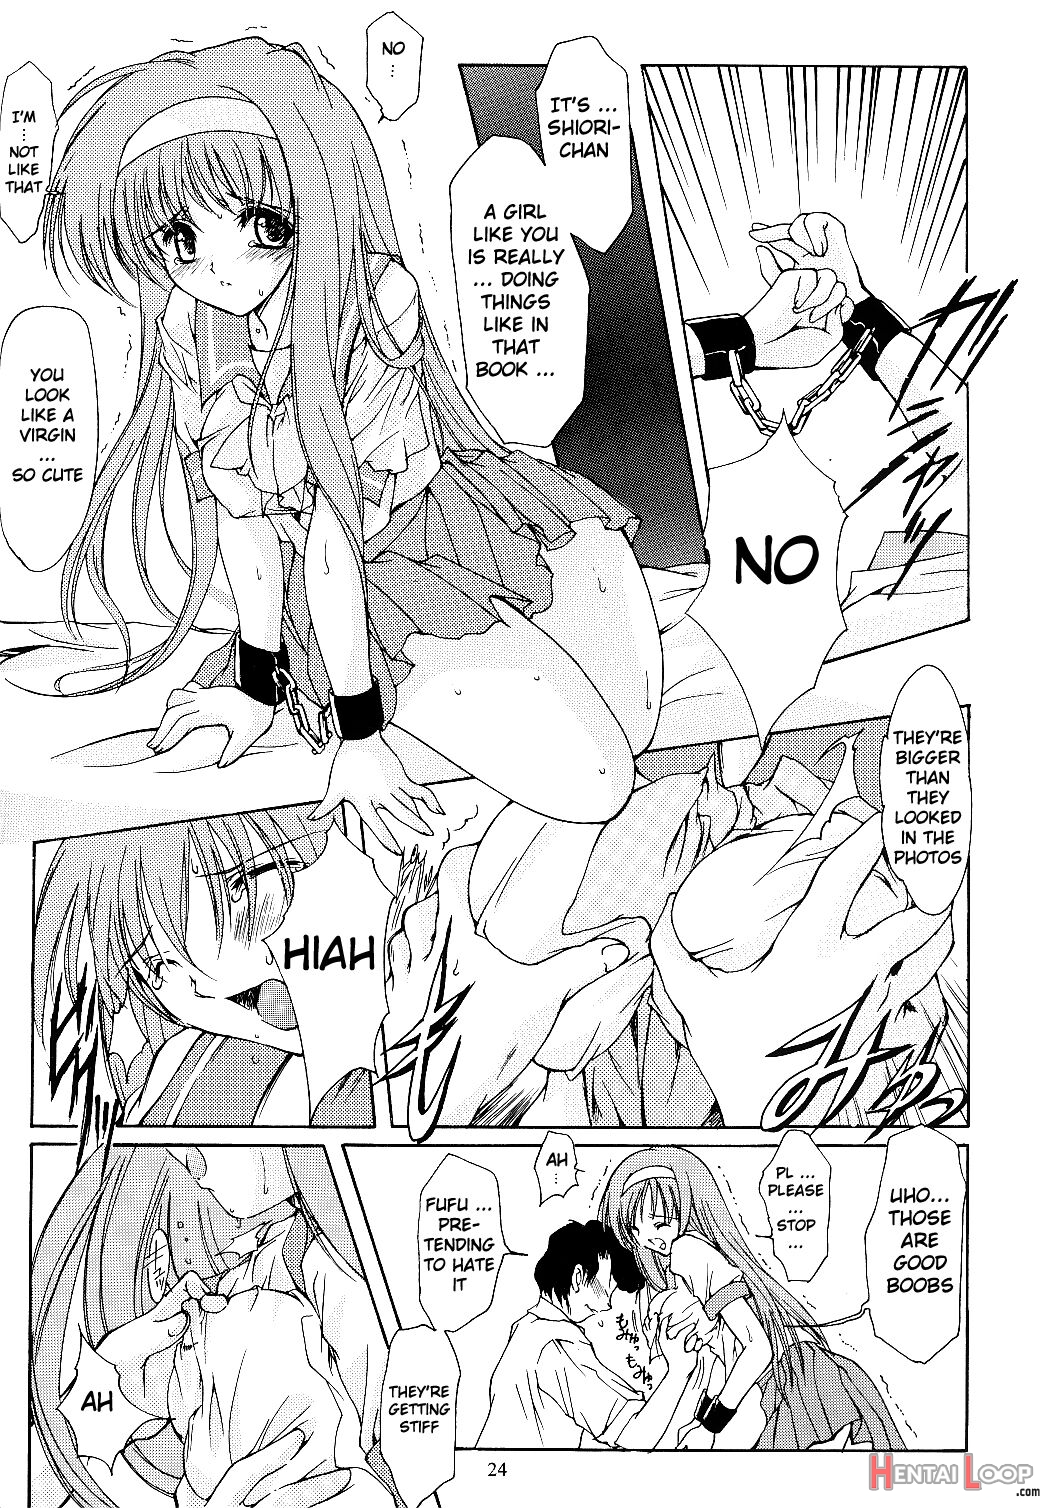 Shiori Volume - 11 - Indecent Extra Class At Night page 23